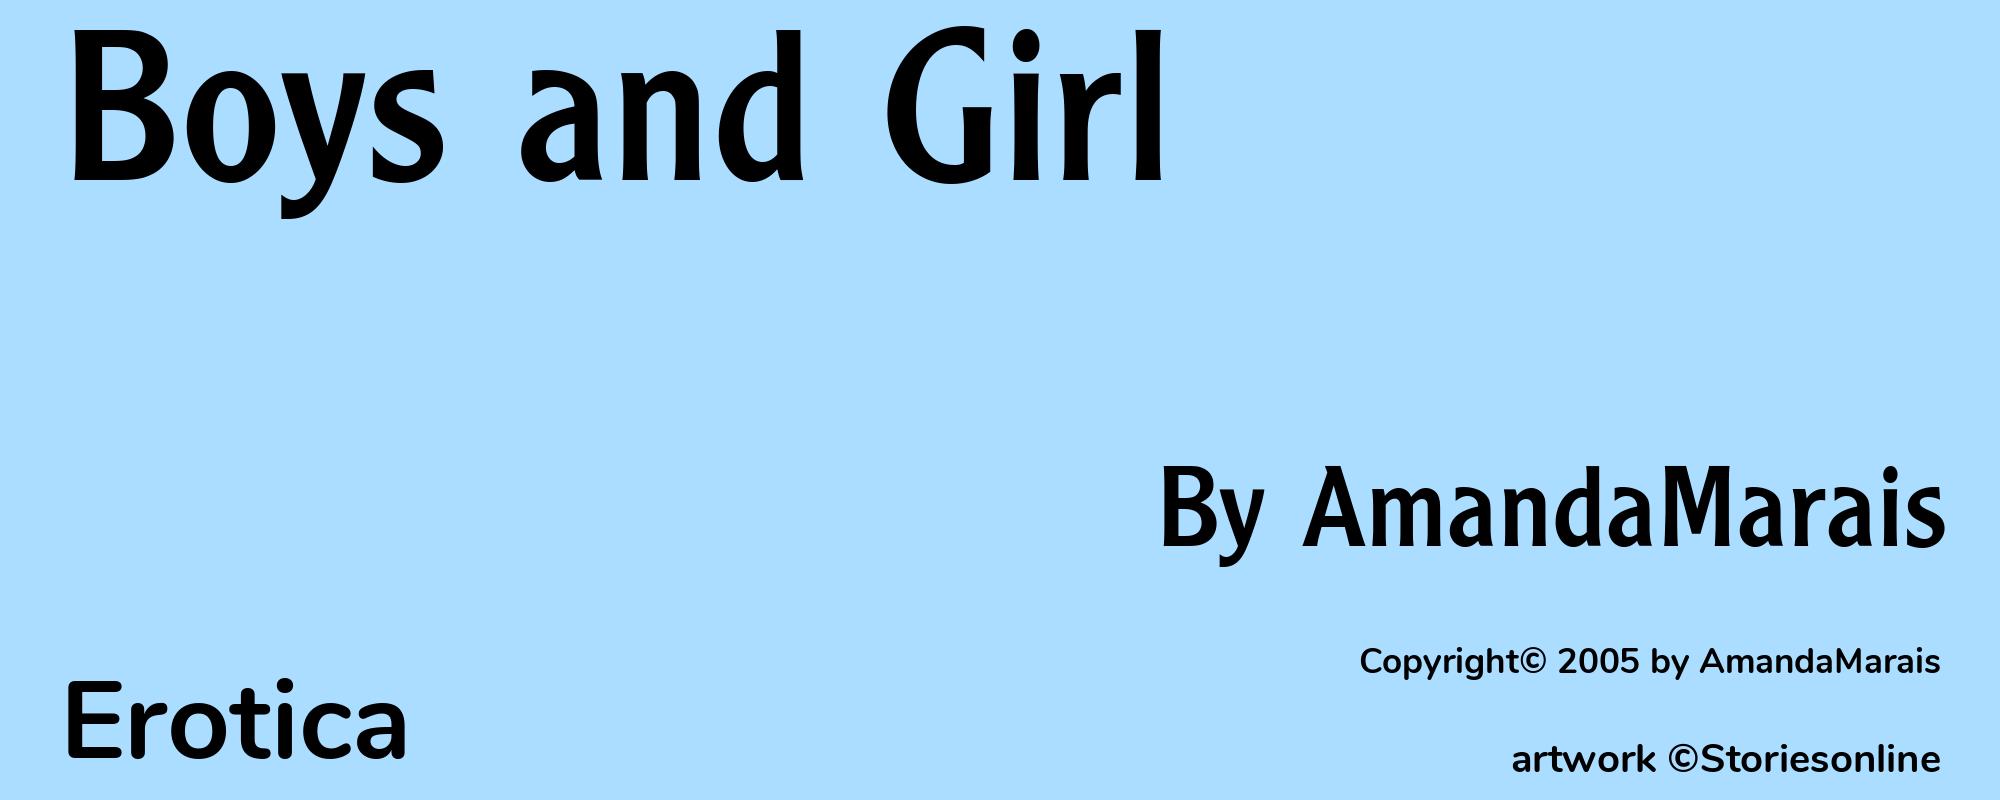 Boys and Girl - Cover